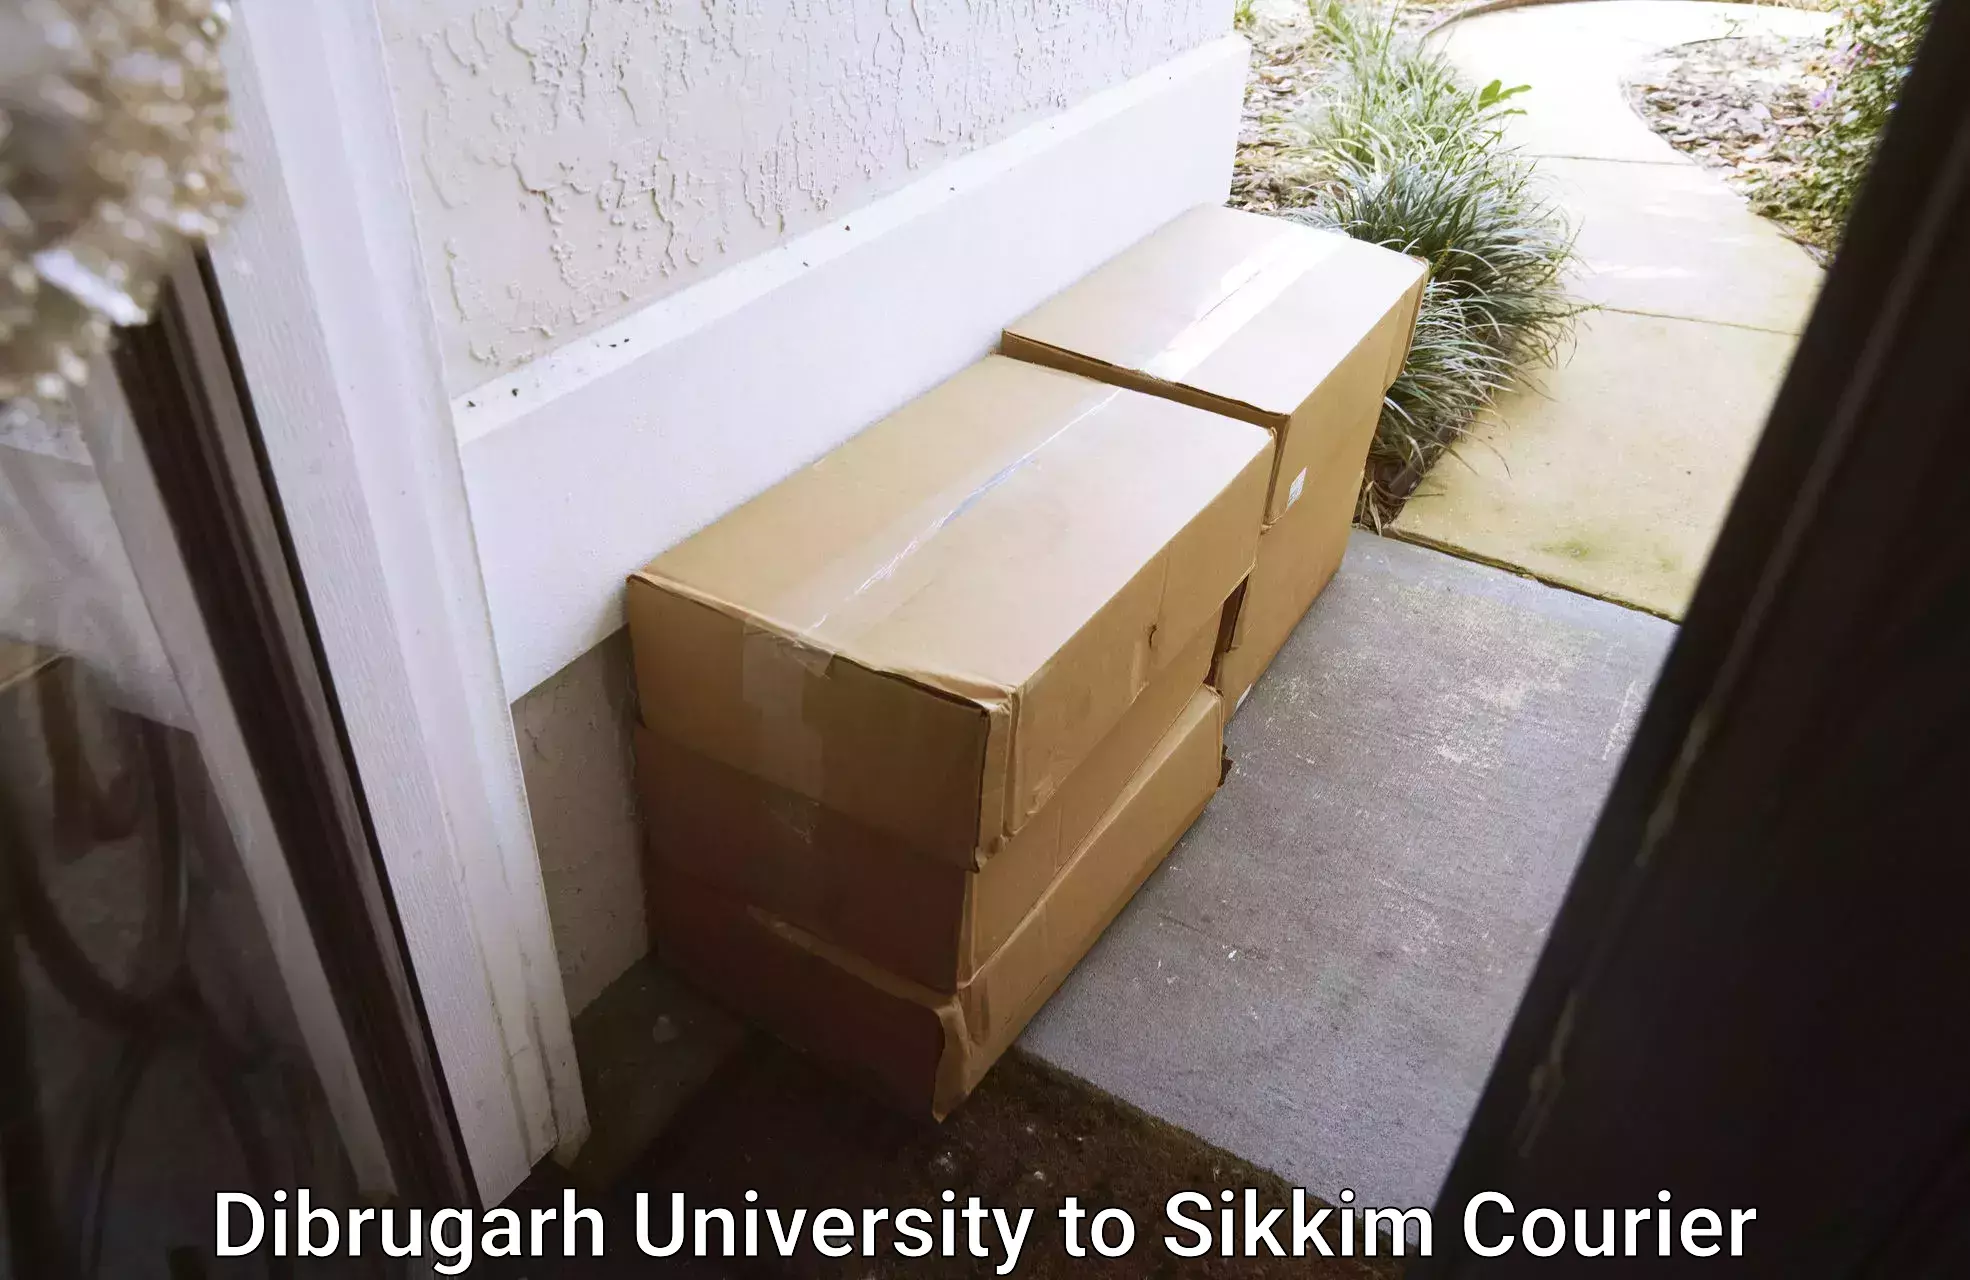 Package delivery network Dibrugarh University to North Sikkim